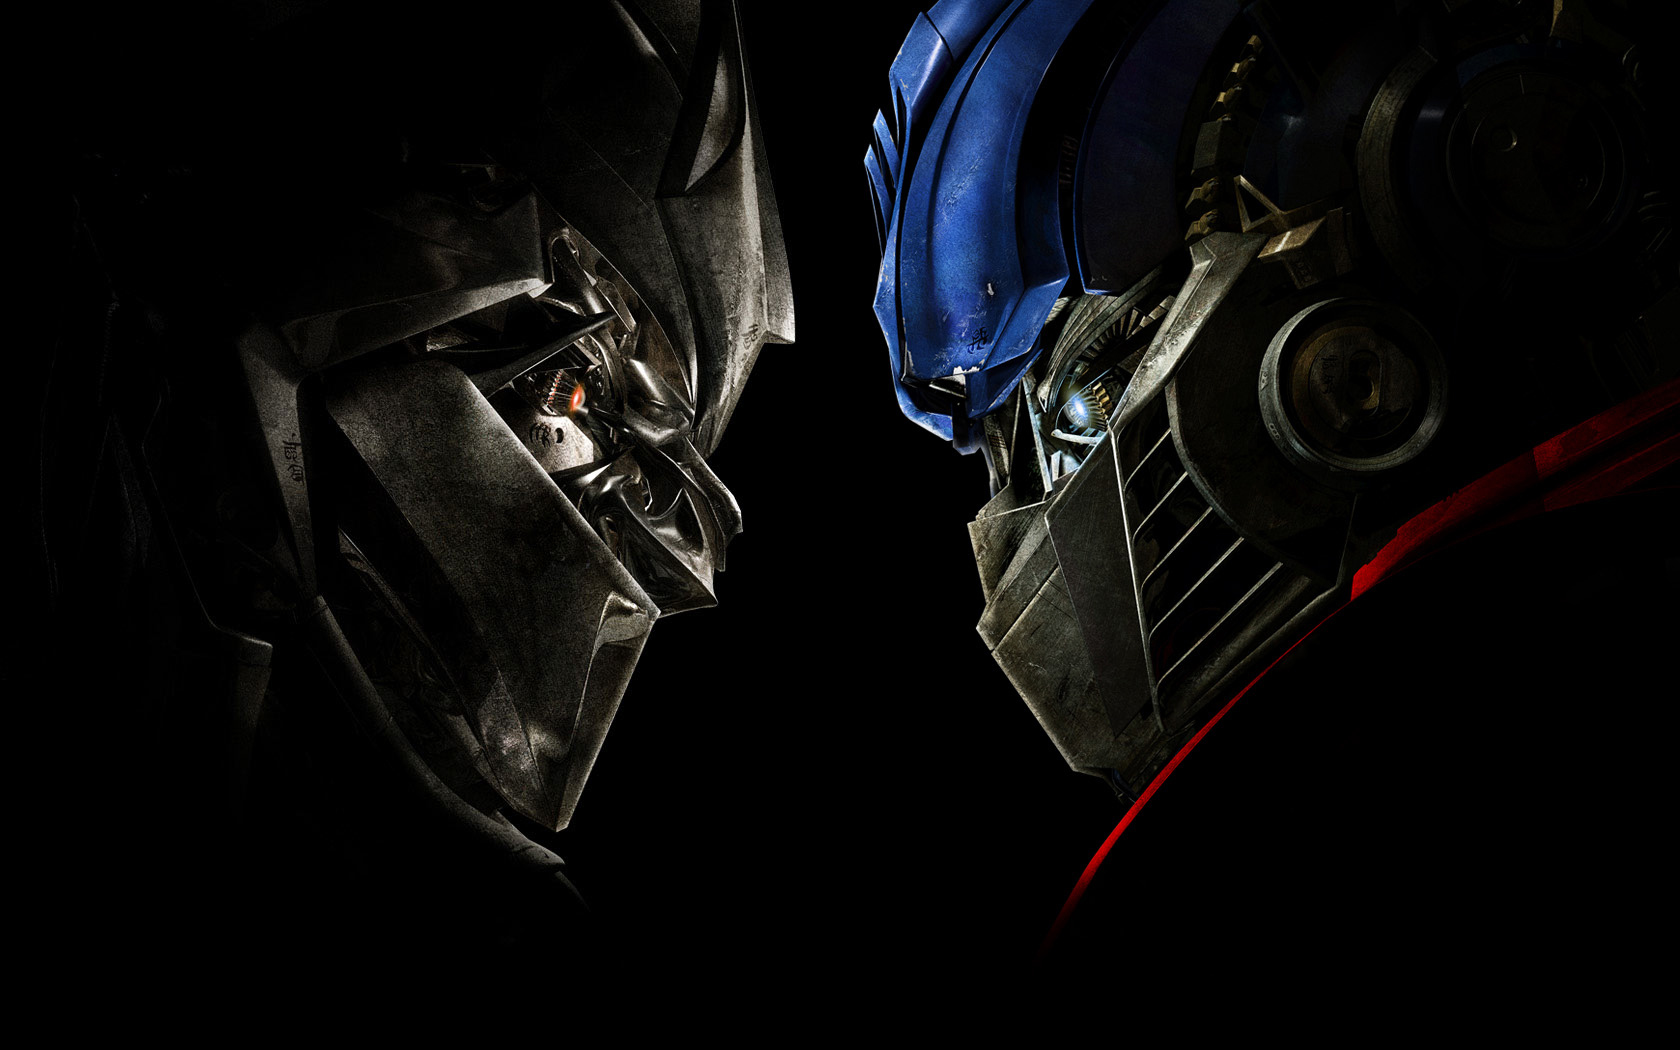 Transformers Optimus Prime and Megatron in epic battle.